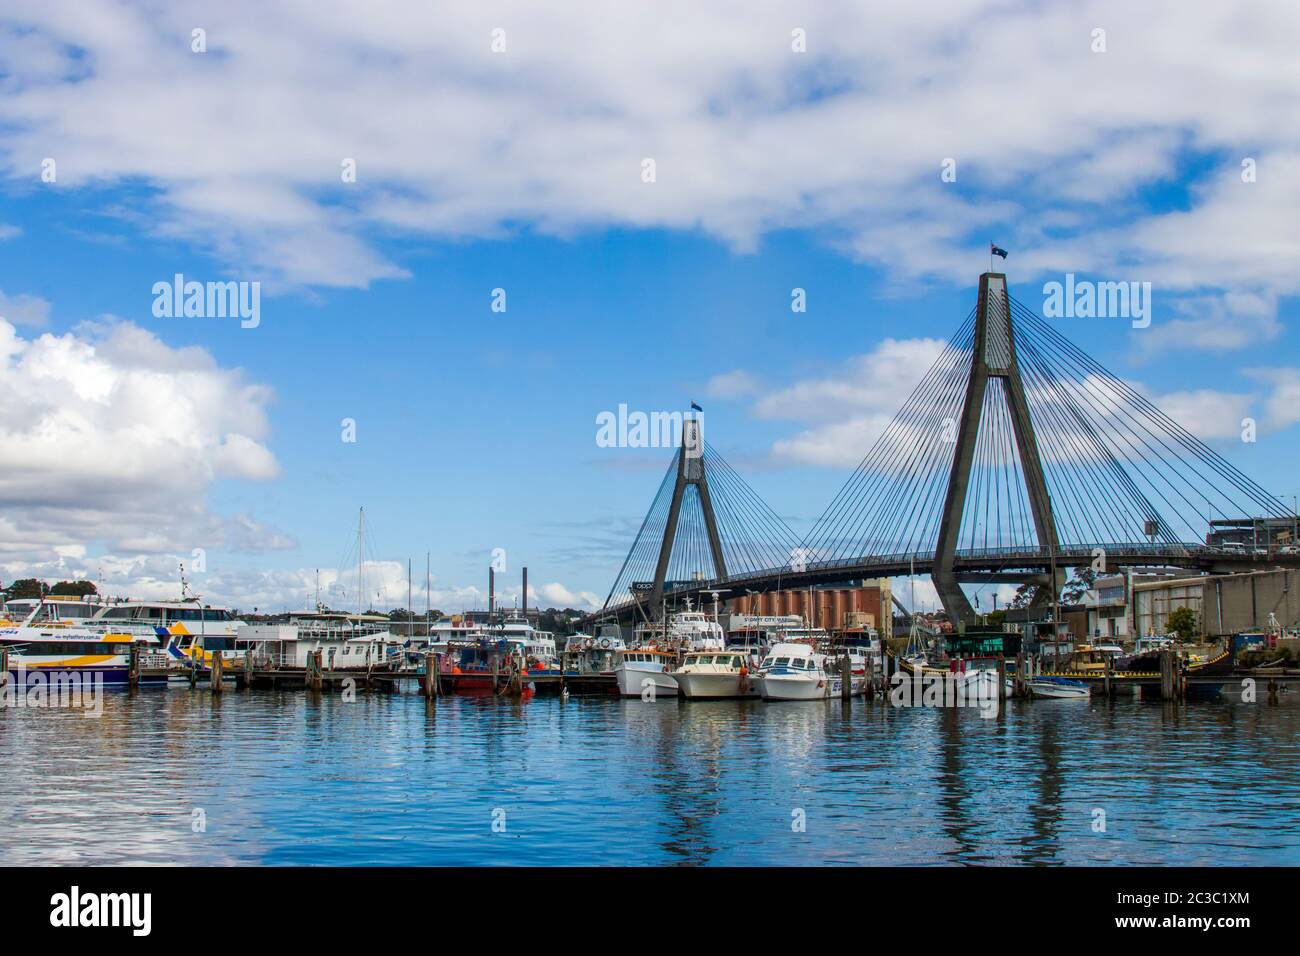 the view of Anzac Bridge and blackwattle bay Sydney Australia. An 8-lane cable-stayed bridge spanning Johnstons Bay between Pyrmont and Glebe Island. Stock Photo